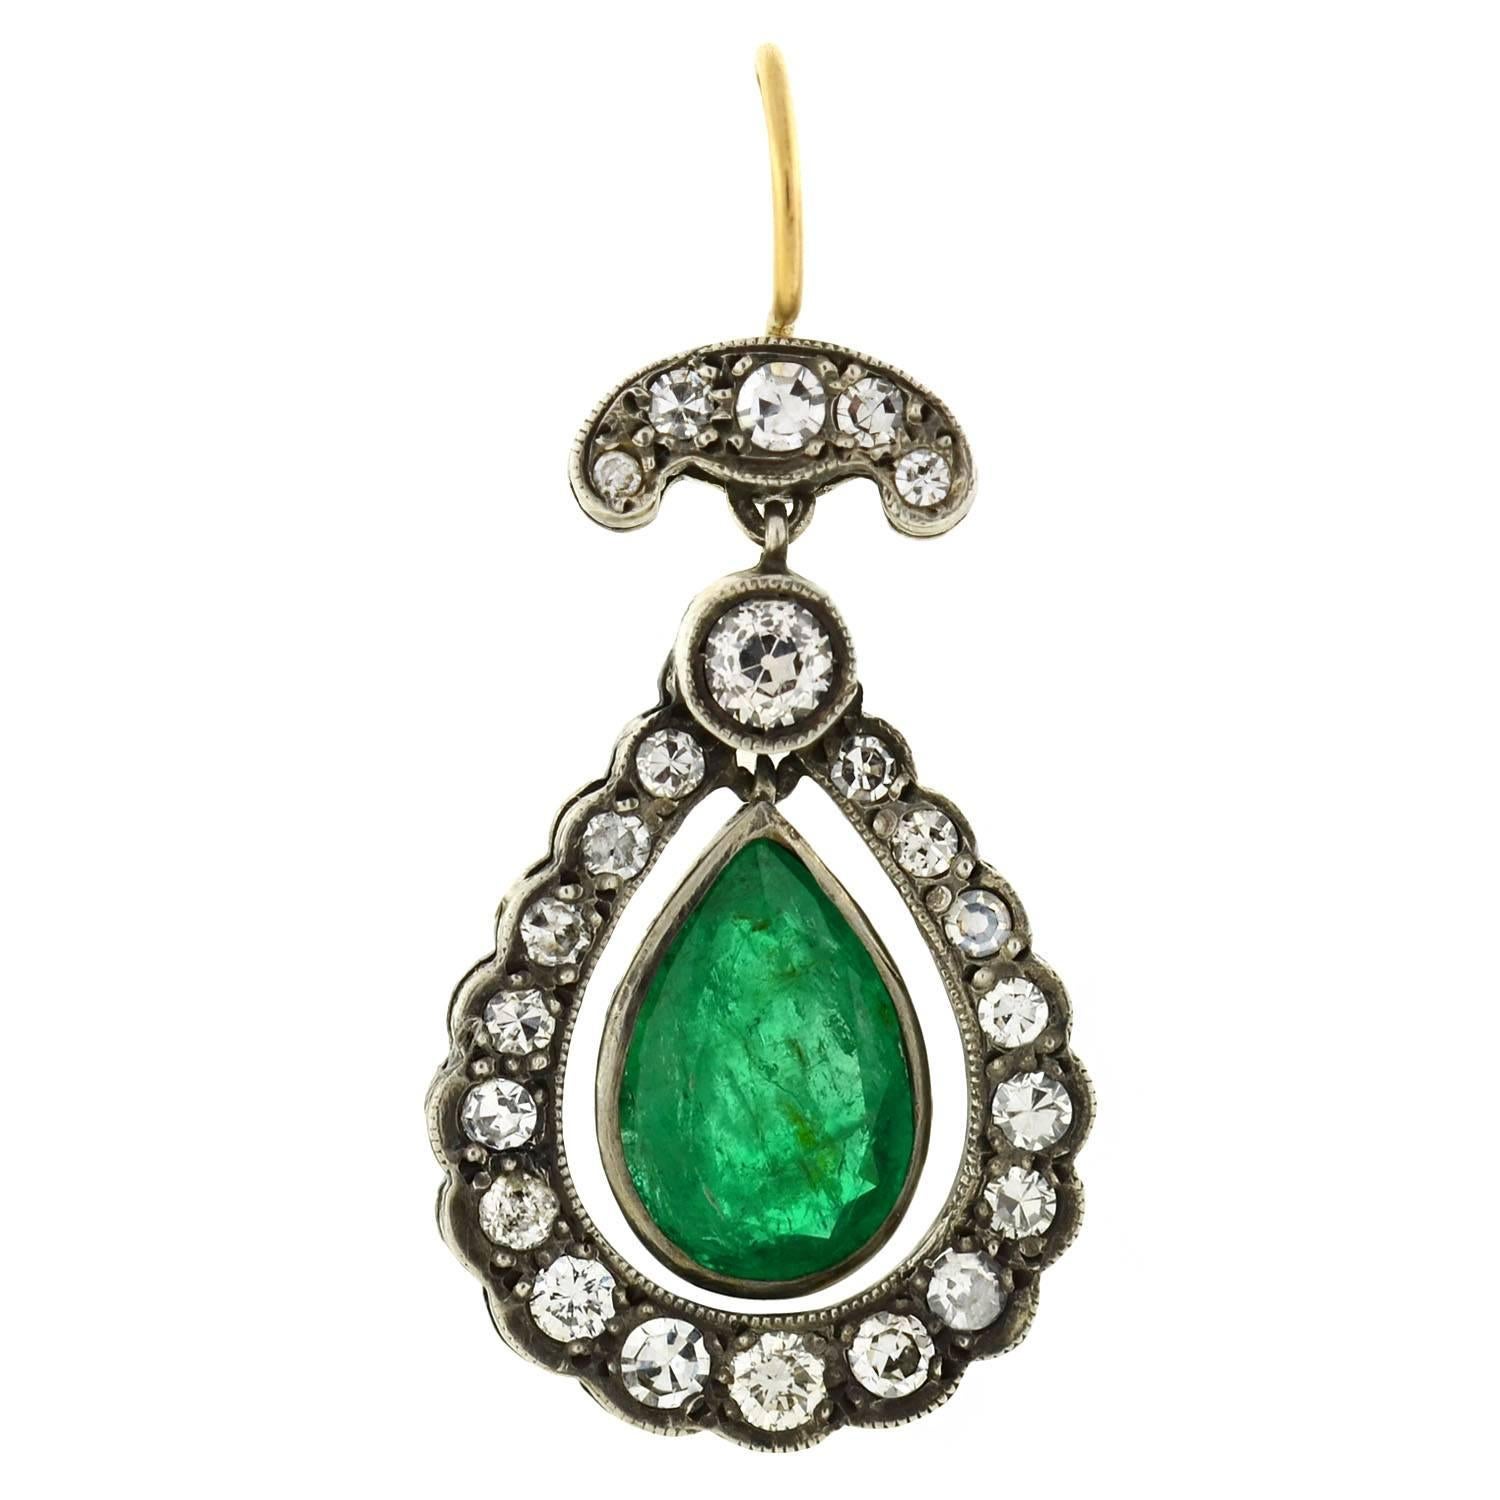 A spectacular pair of emerald and diamond earrings from the Edwardian (ca1910) era! These breathtaking earrings are crafted in silver and hang from 14K gold wires. Each earring frames a luscious emerald teardrop at the center of a sparkling diamond